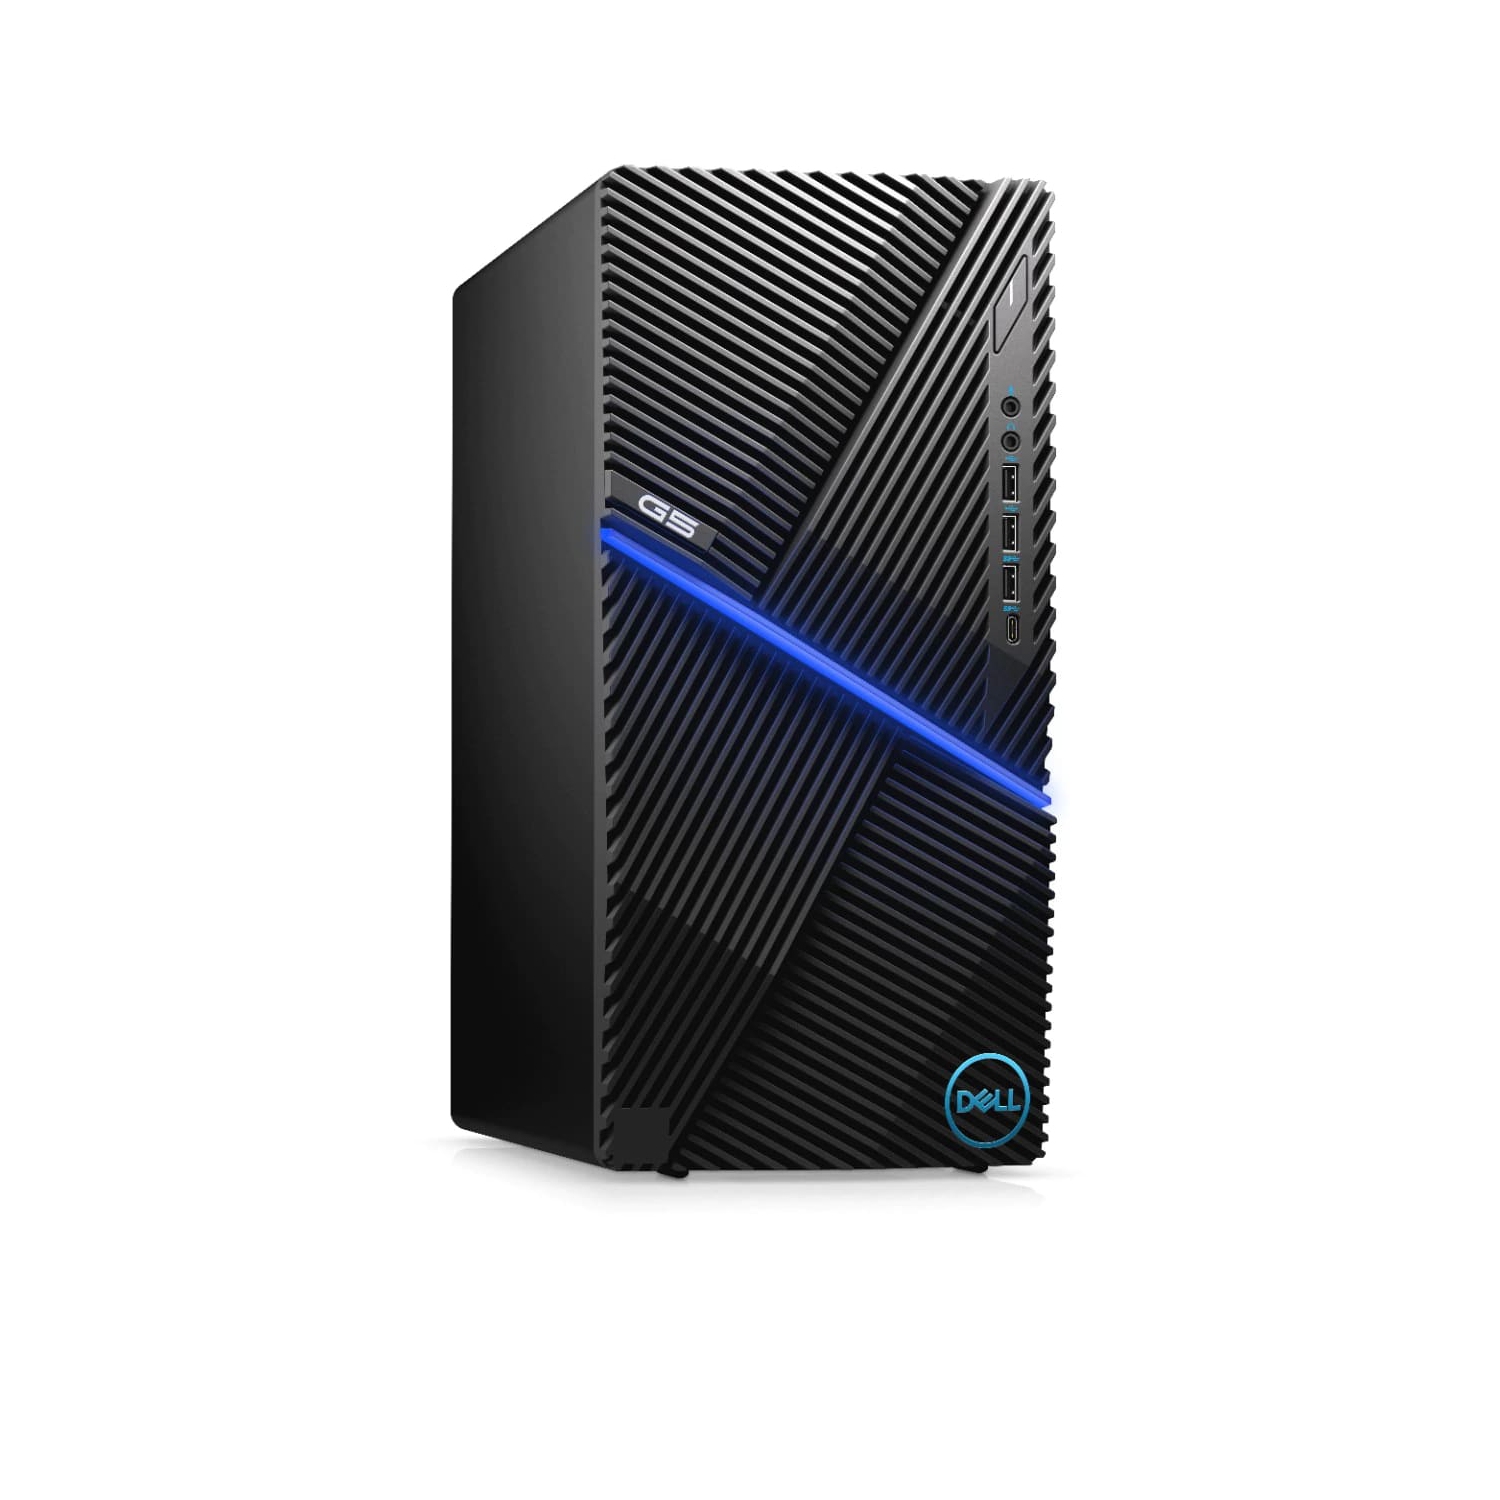 Refurbished (Excellent) - Dell G5 5000 Gaming Desktop (2020), Core i7 - 2TB HDD + 512GB SSD - 16GB RAM - RTX 3070, 8 Cores @ 5.1 GHz - 10th Gen CPU Certified Refurbished